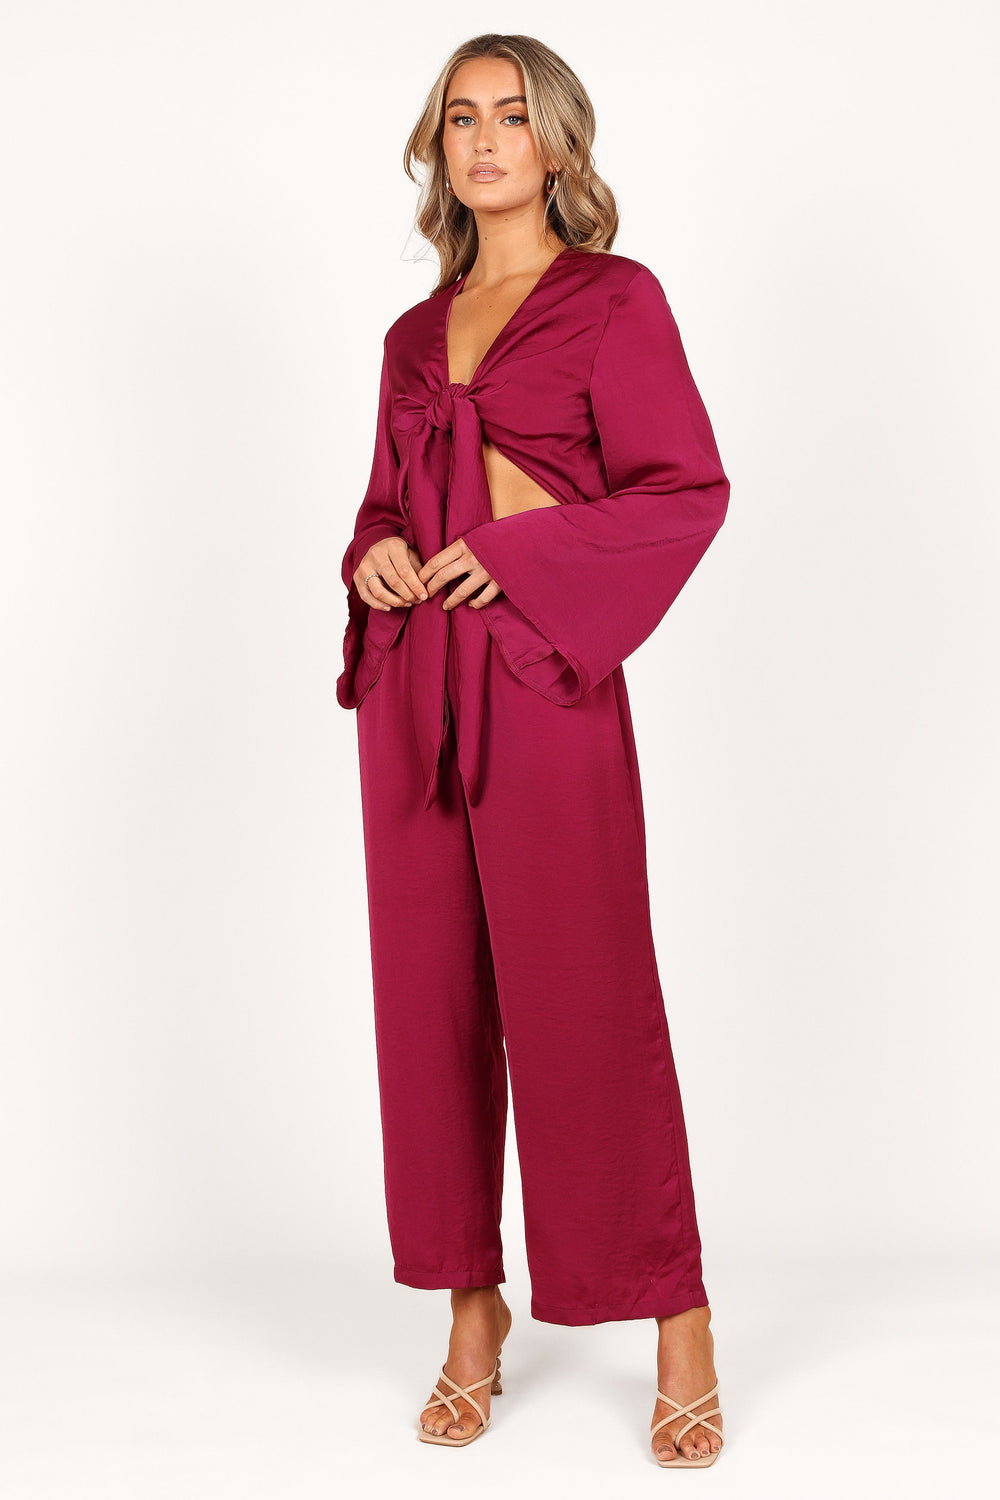 Petal and Pup USA Rompers Pluto Jumpsuit - Magenta